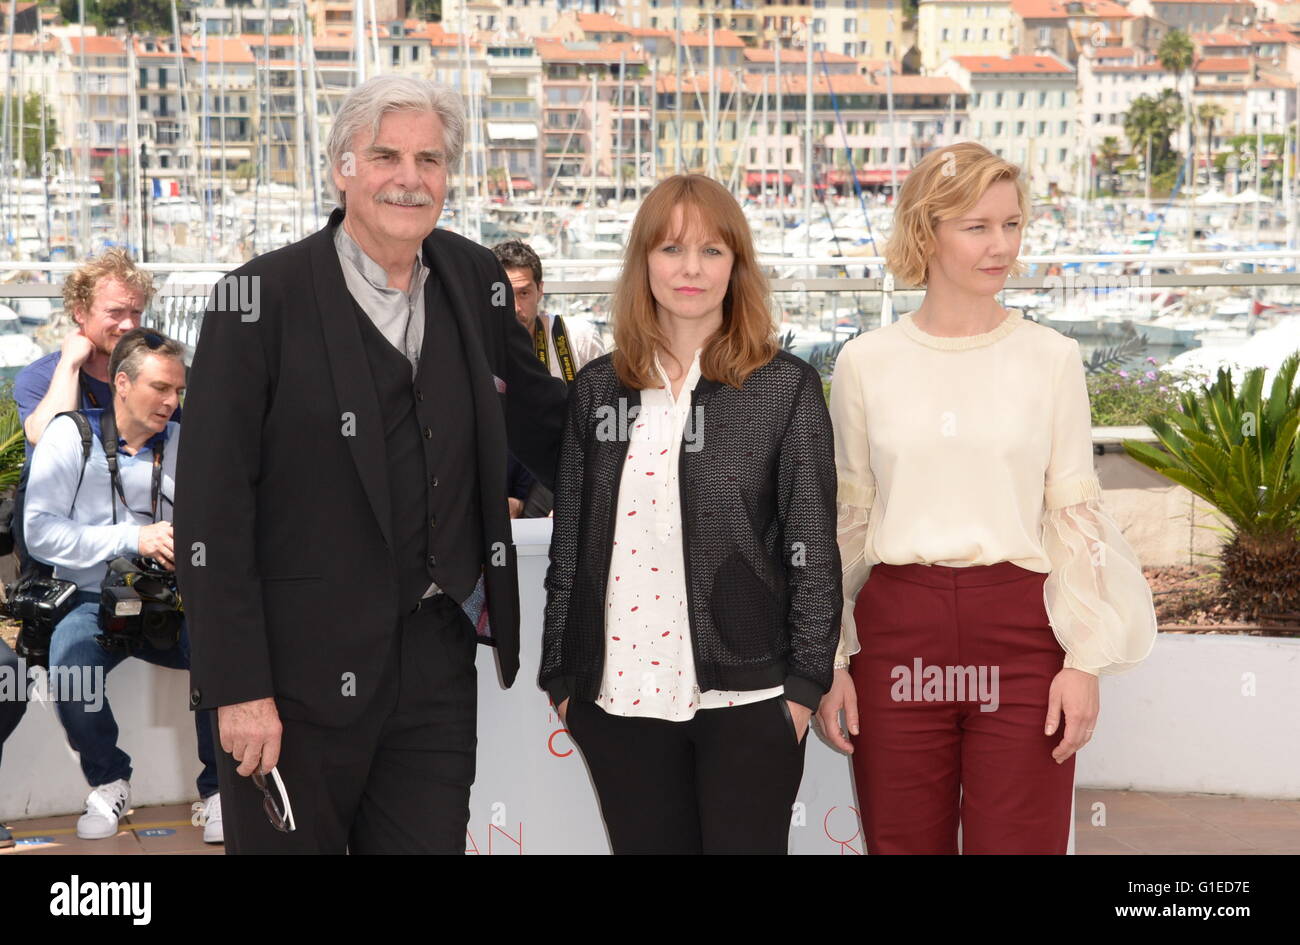 Cannes, France. 11th May, 2016. CANNES, FRANCE - MAY 14: (L-R) Actor Peter Simonischek, director Maren Ade and actress Sandra Hueller attend the 'Toni Erdmann' photocall during the 69th annual Cannes Film Festival at the Palais des Festivals on May 14, 2016 in Cannes, France. © Frederick Injimbert/ZUMA Wire/Alamy Live News Stock Photo